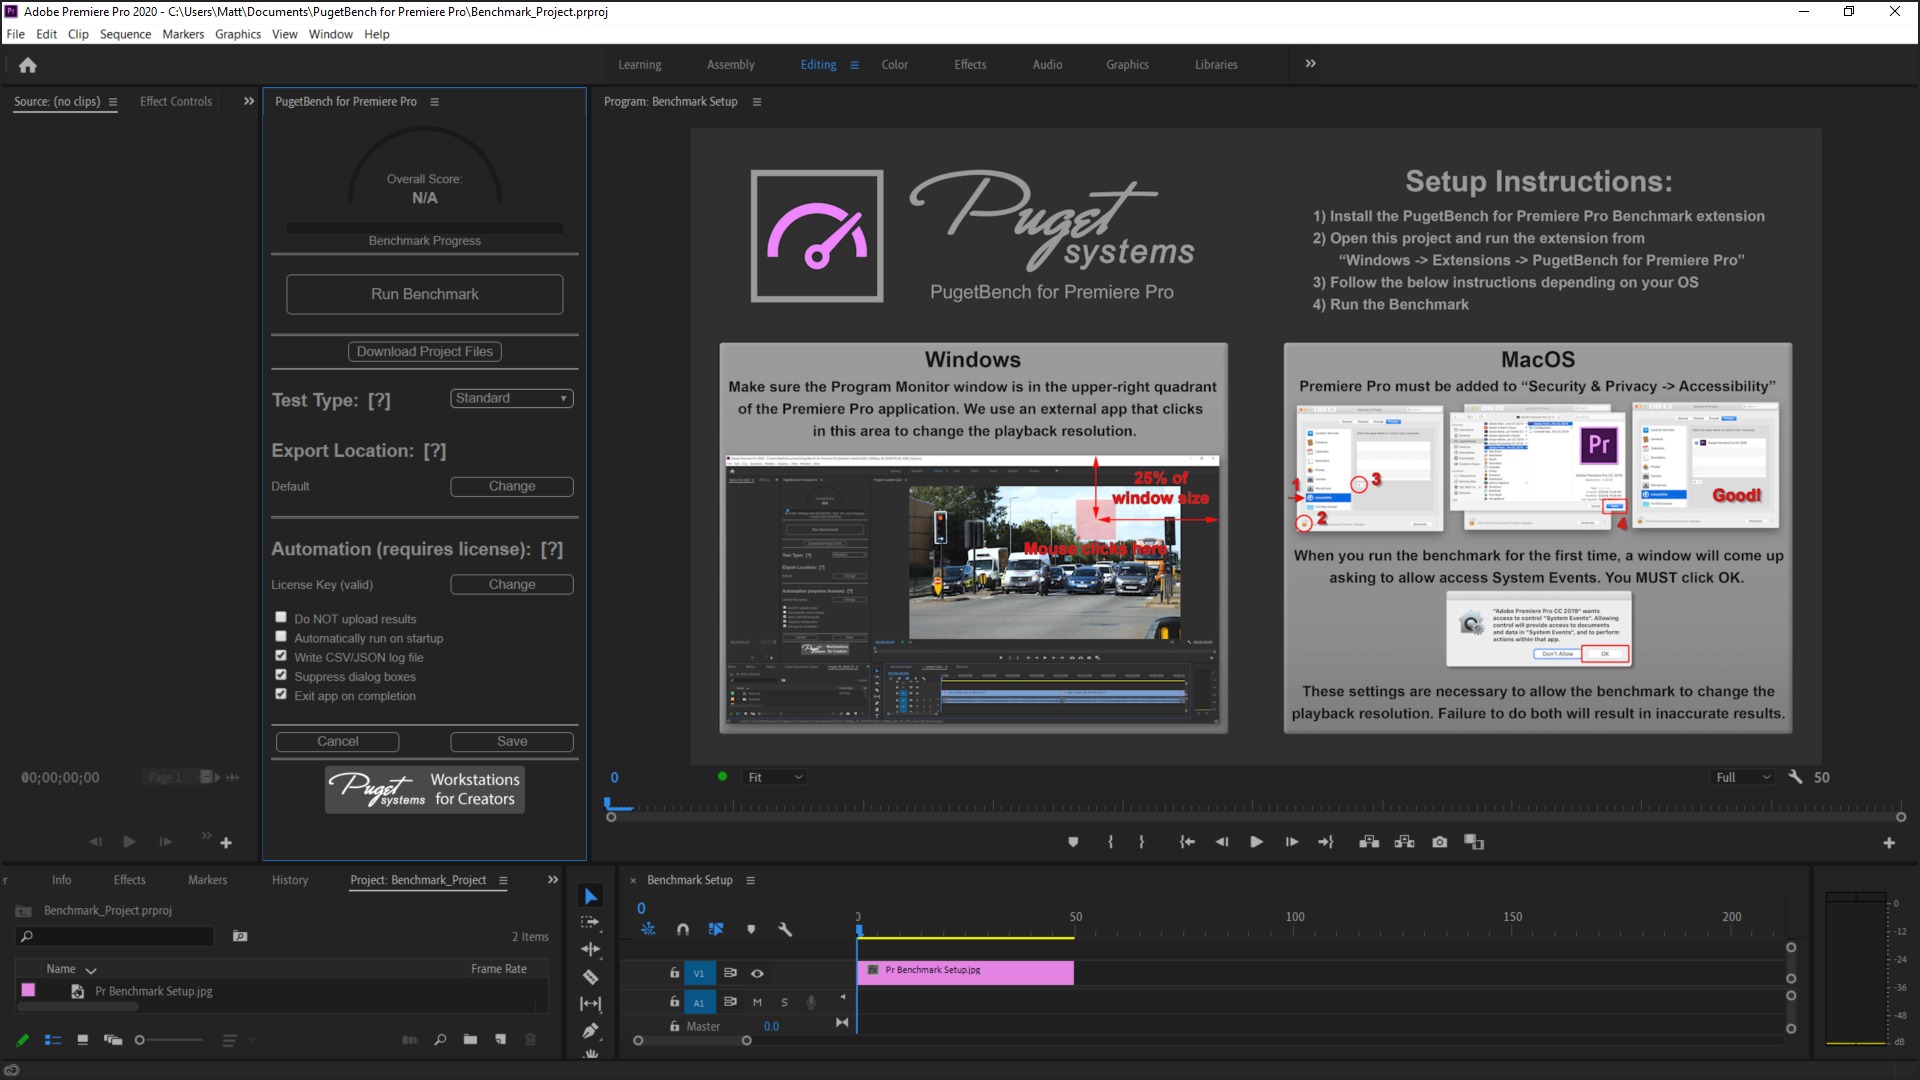 PugetBench for Premiere Pro